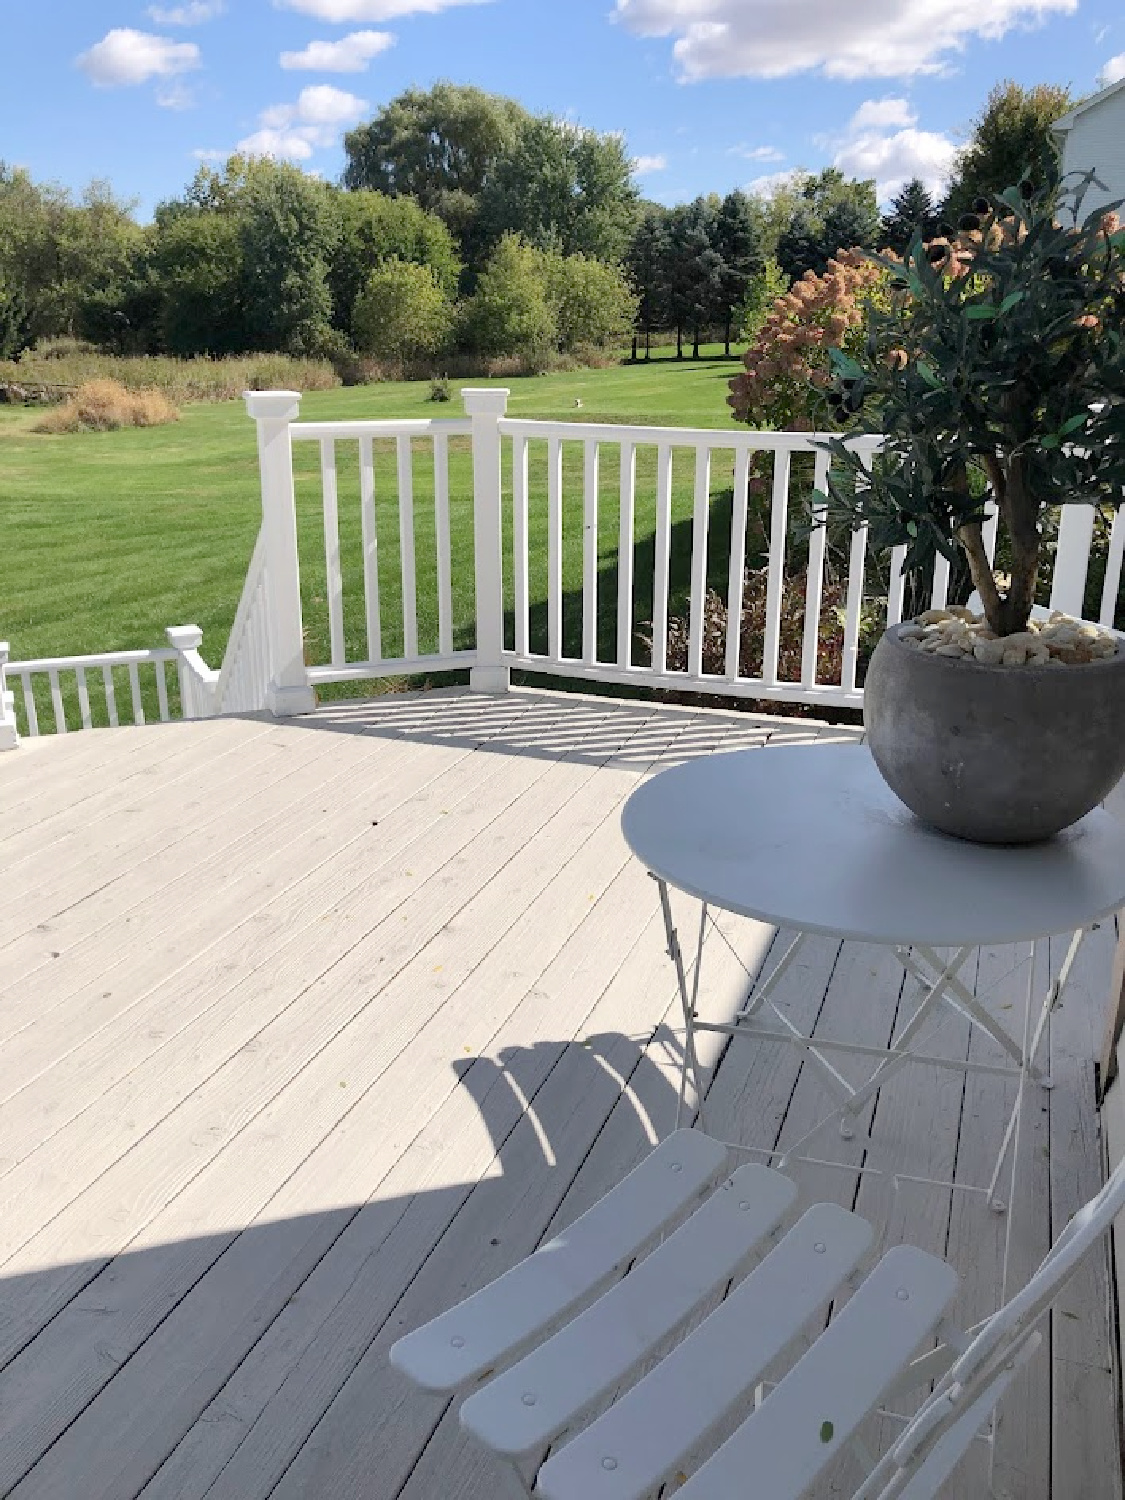 Hello Lovely's deck with white railing and gray flooring.